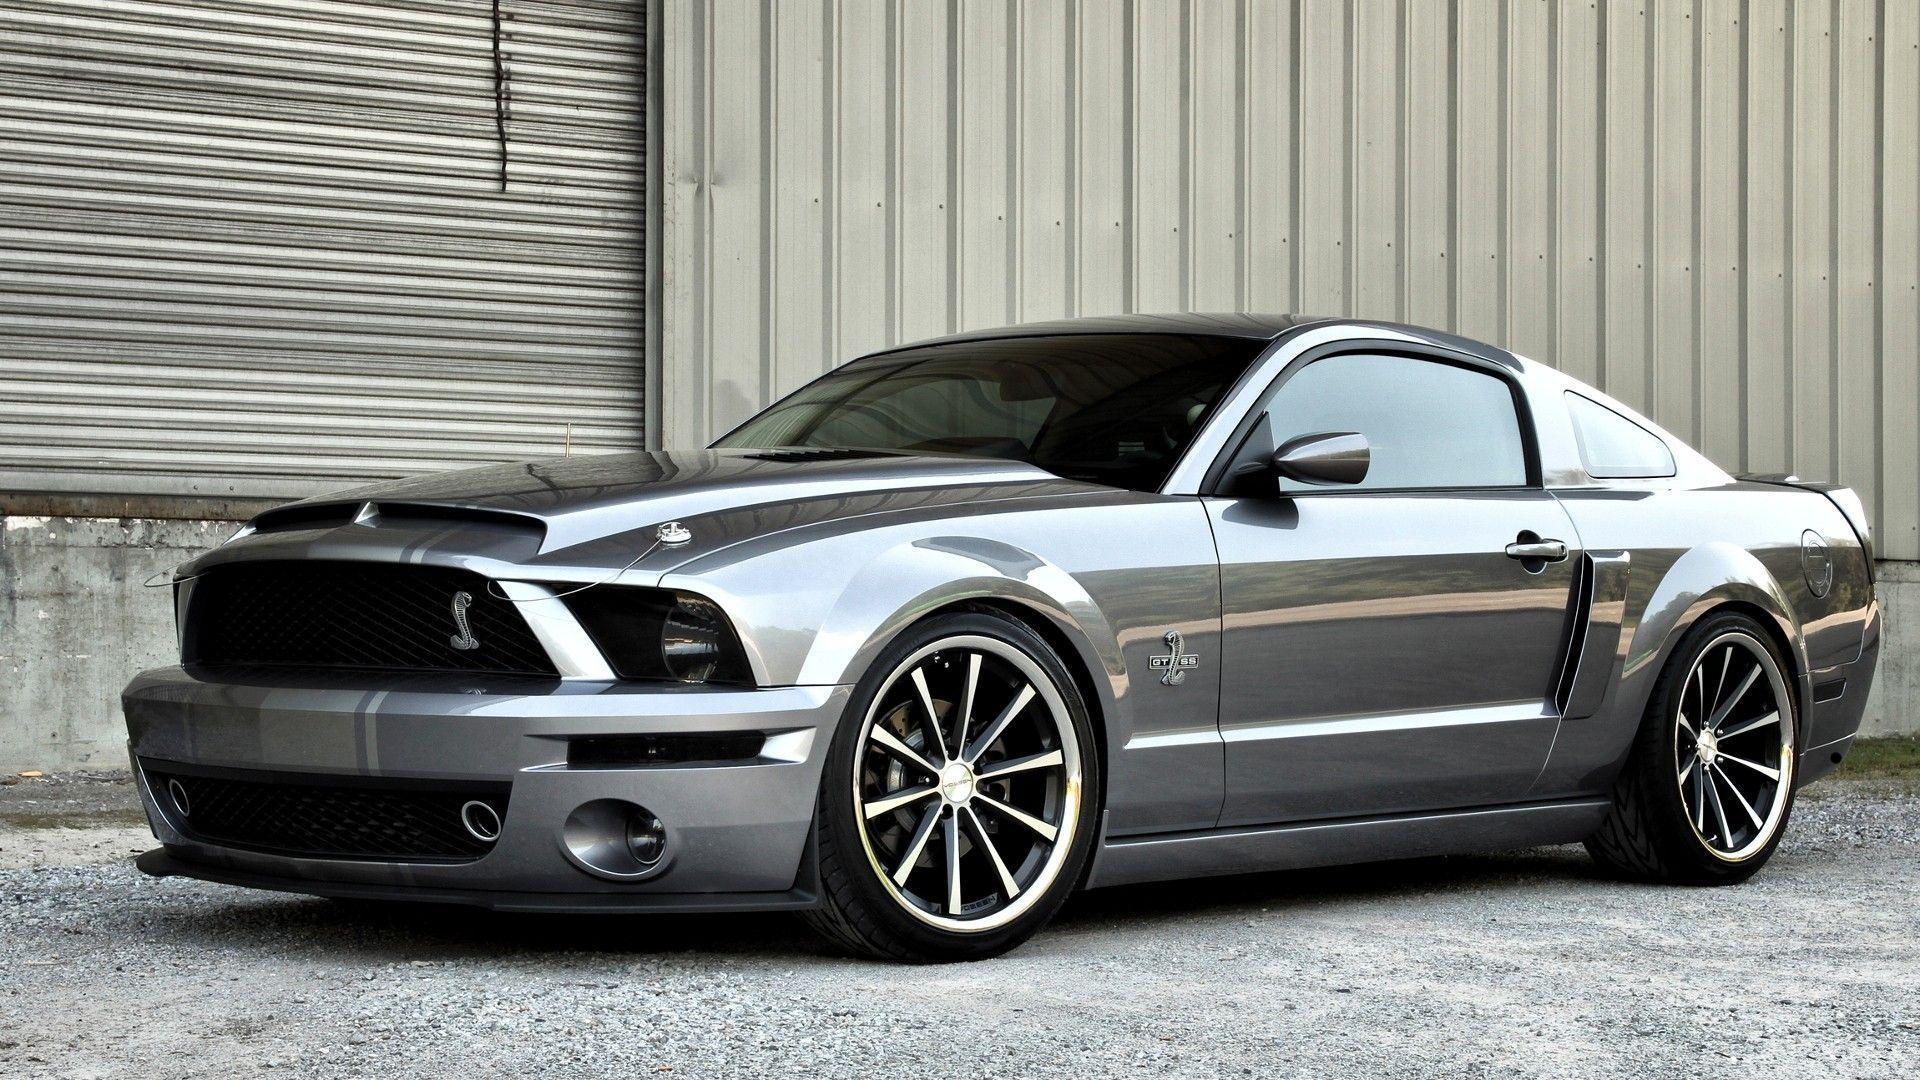 Muscle Cars Wallpaper Mustang For Desktop Background 13 HD